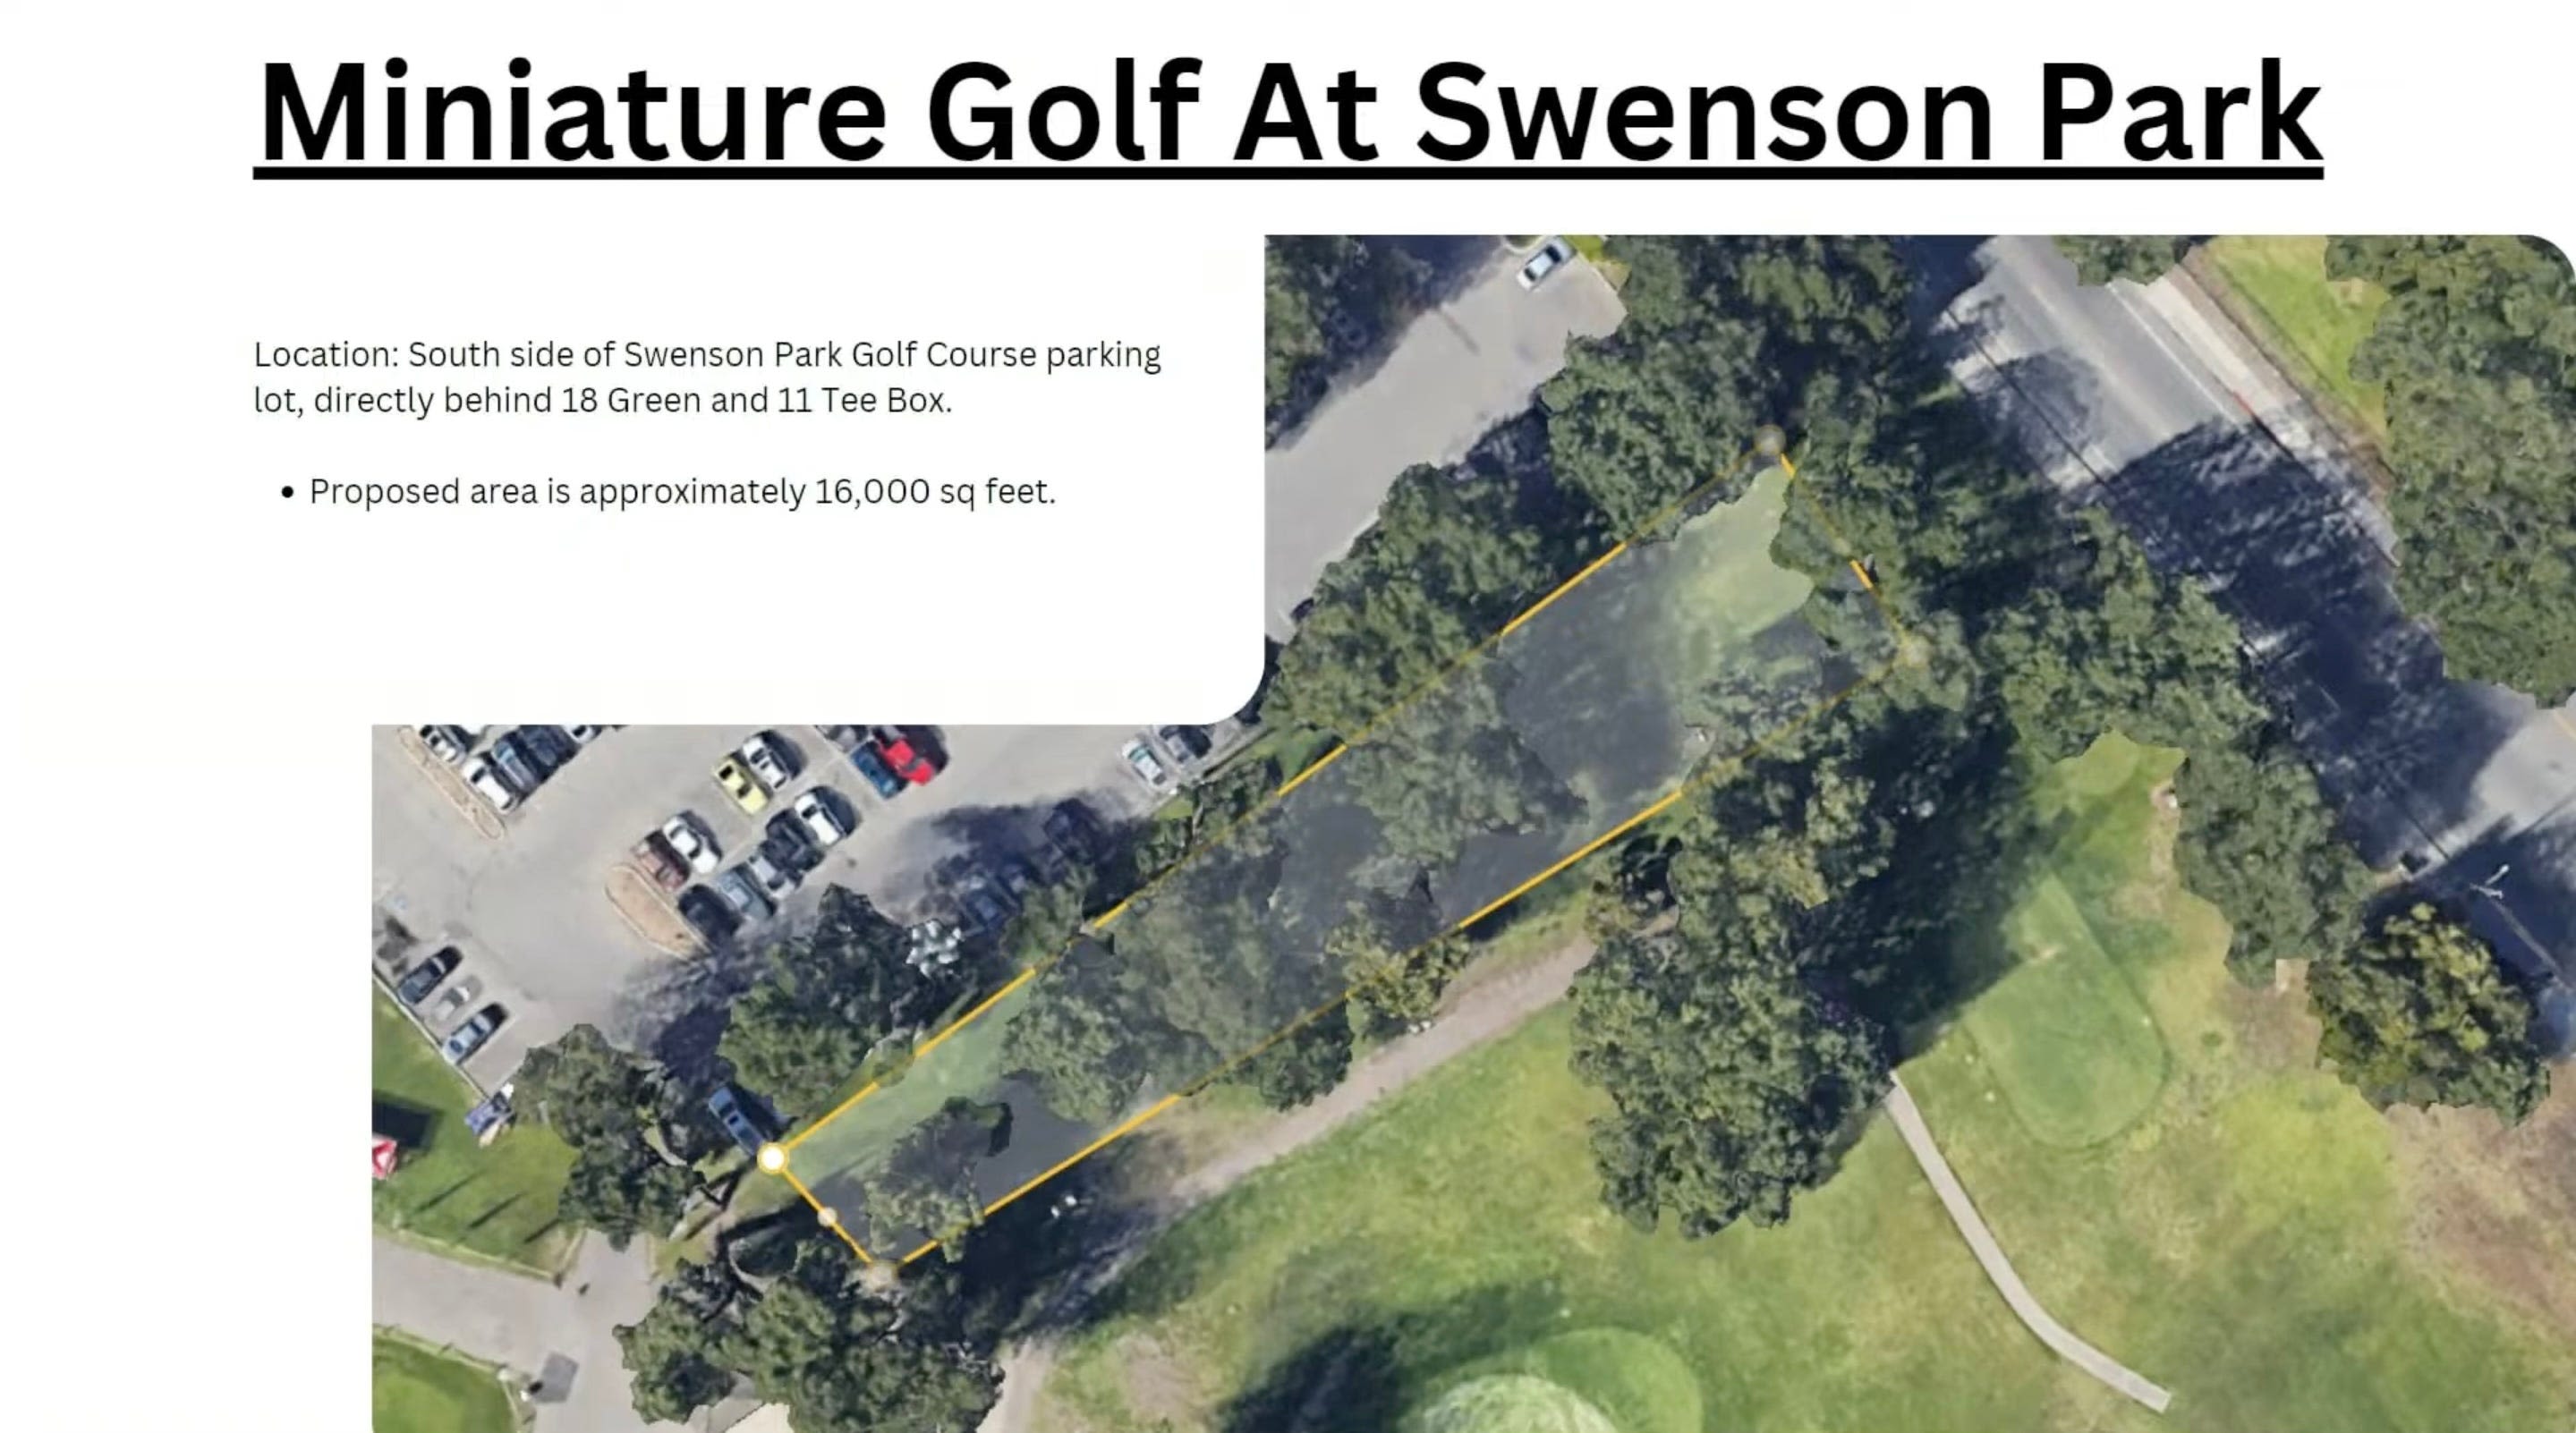 Mini golf, Toptracer Golf driving range coming to Swenson Park Golf Course in Stockton